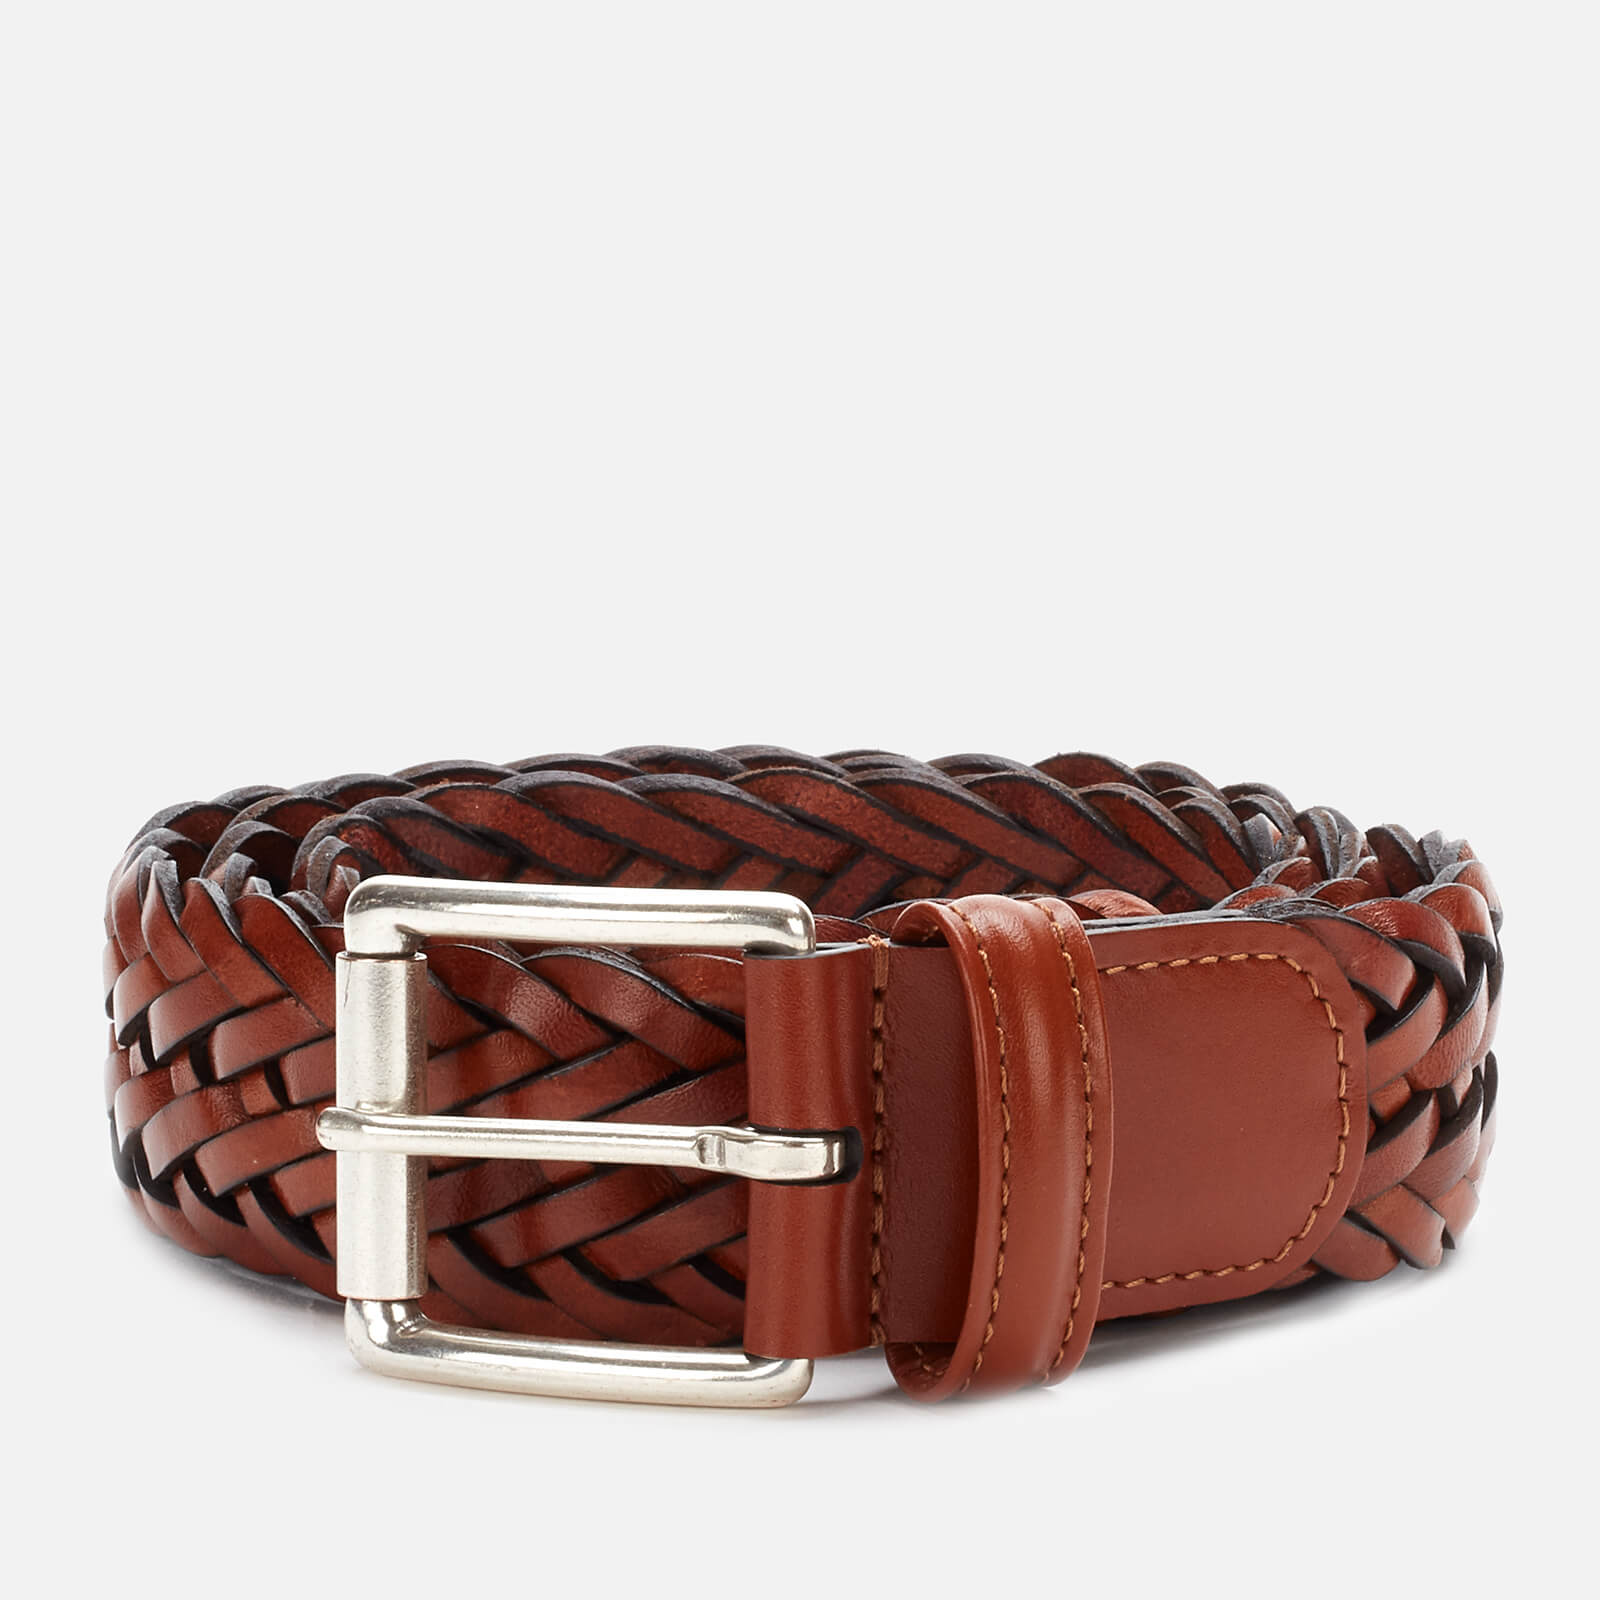 Anderson's Men's Woven Leather Belt - Brown - W34/L